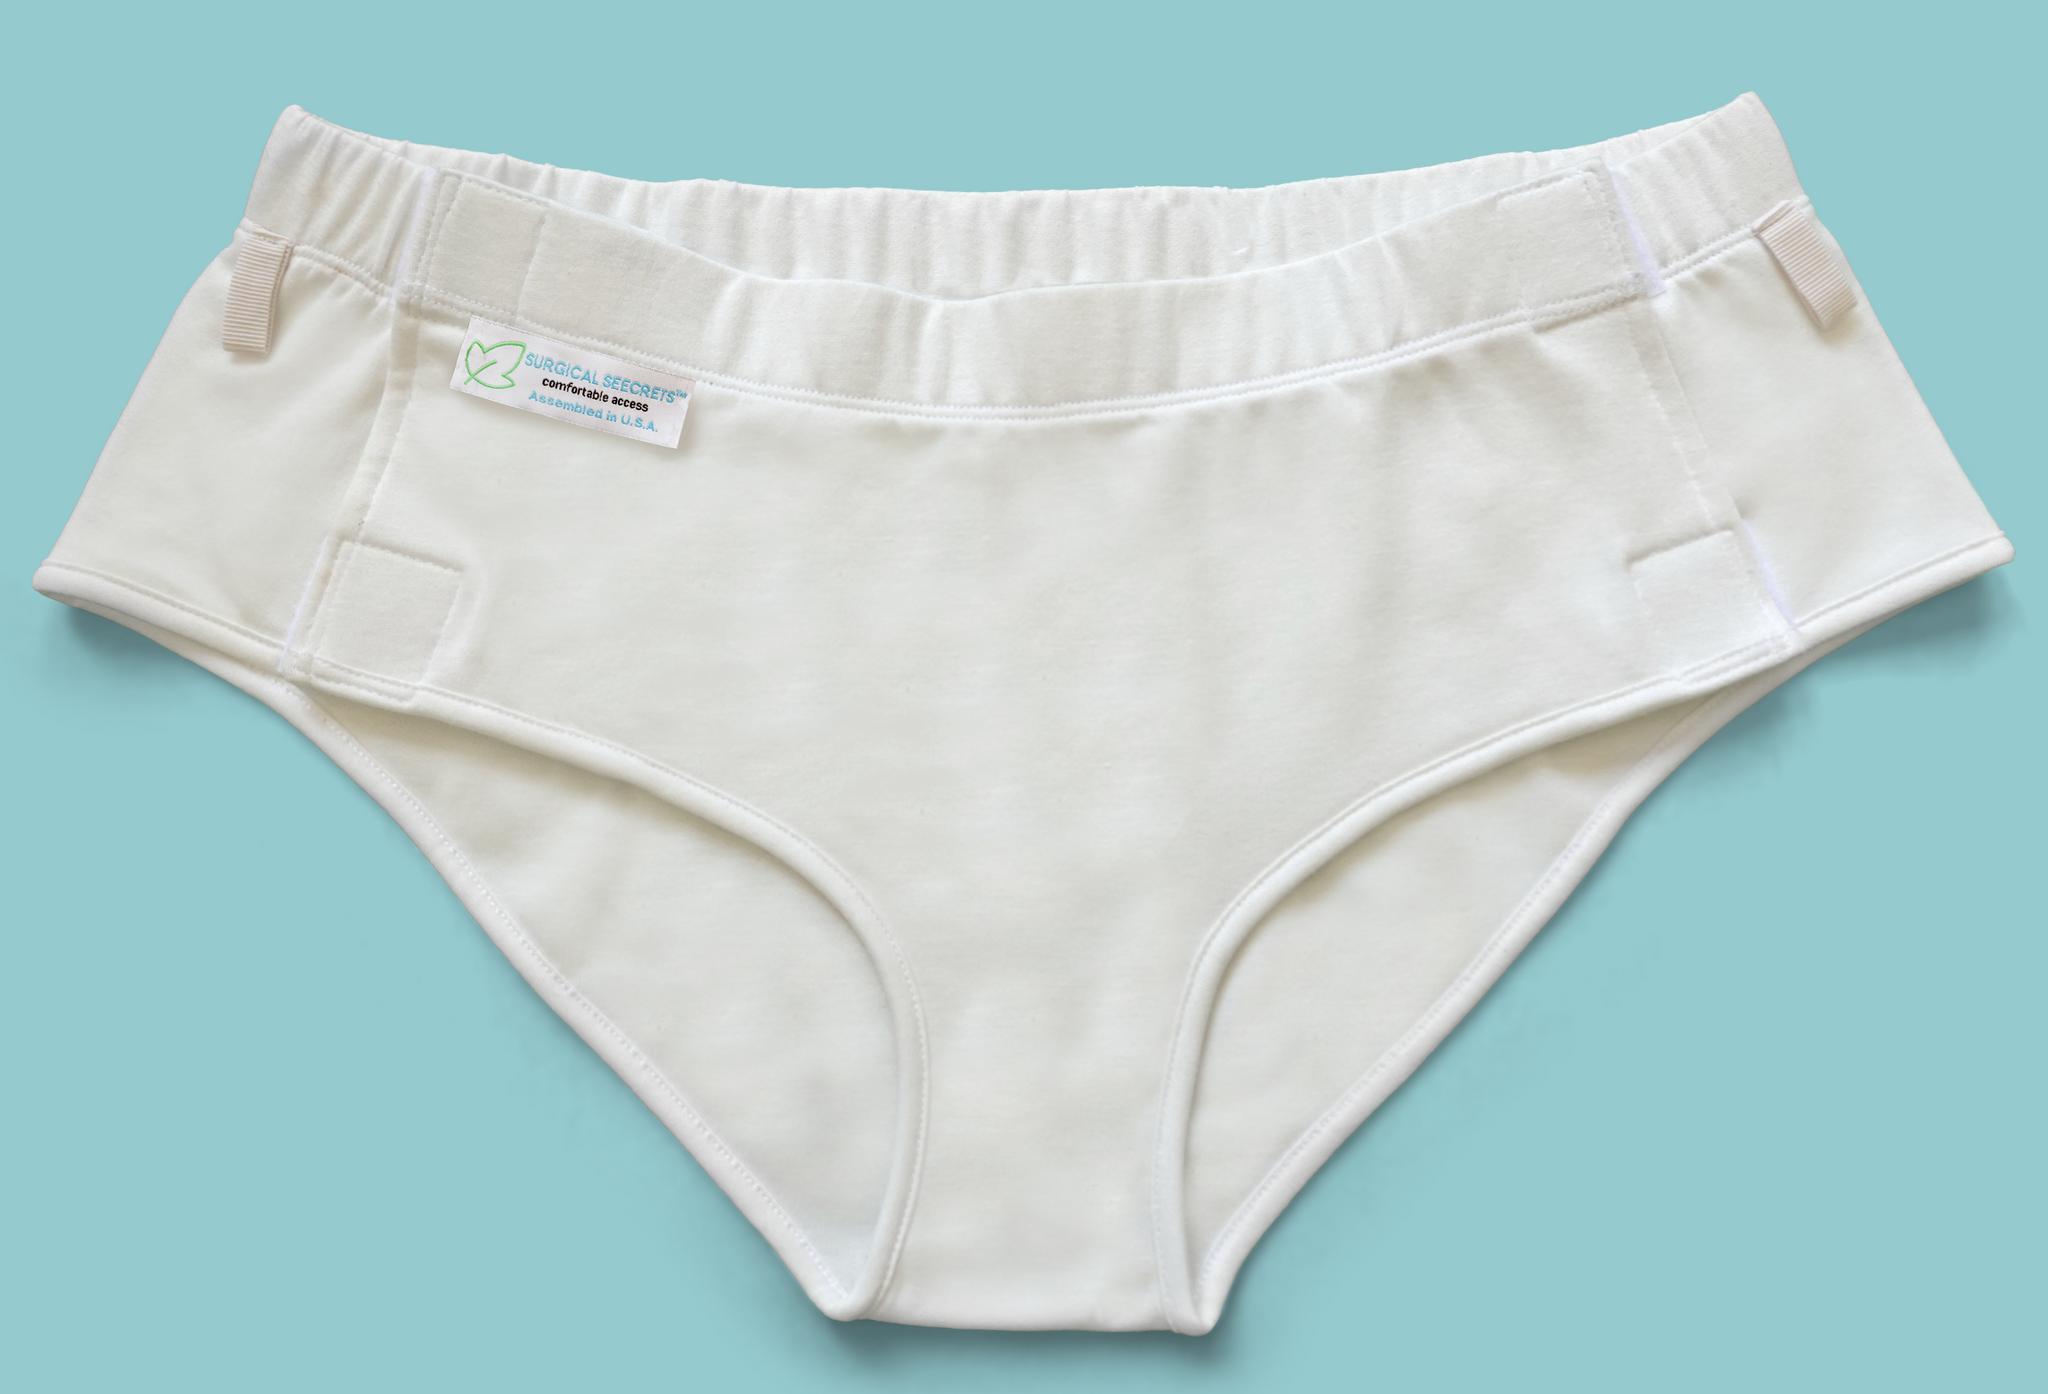 Seecret Undies - for comfortable access to your wounds – Surgical